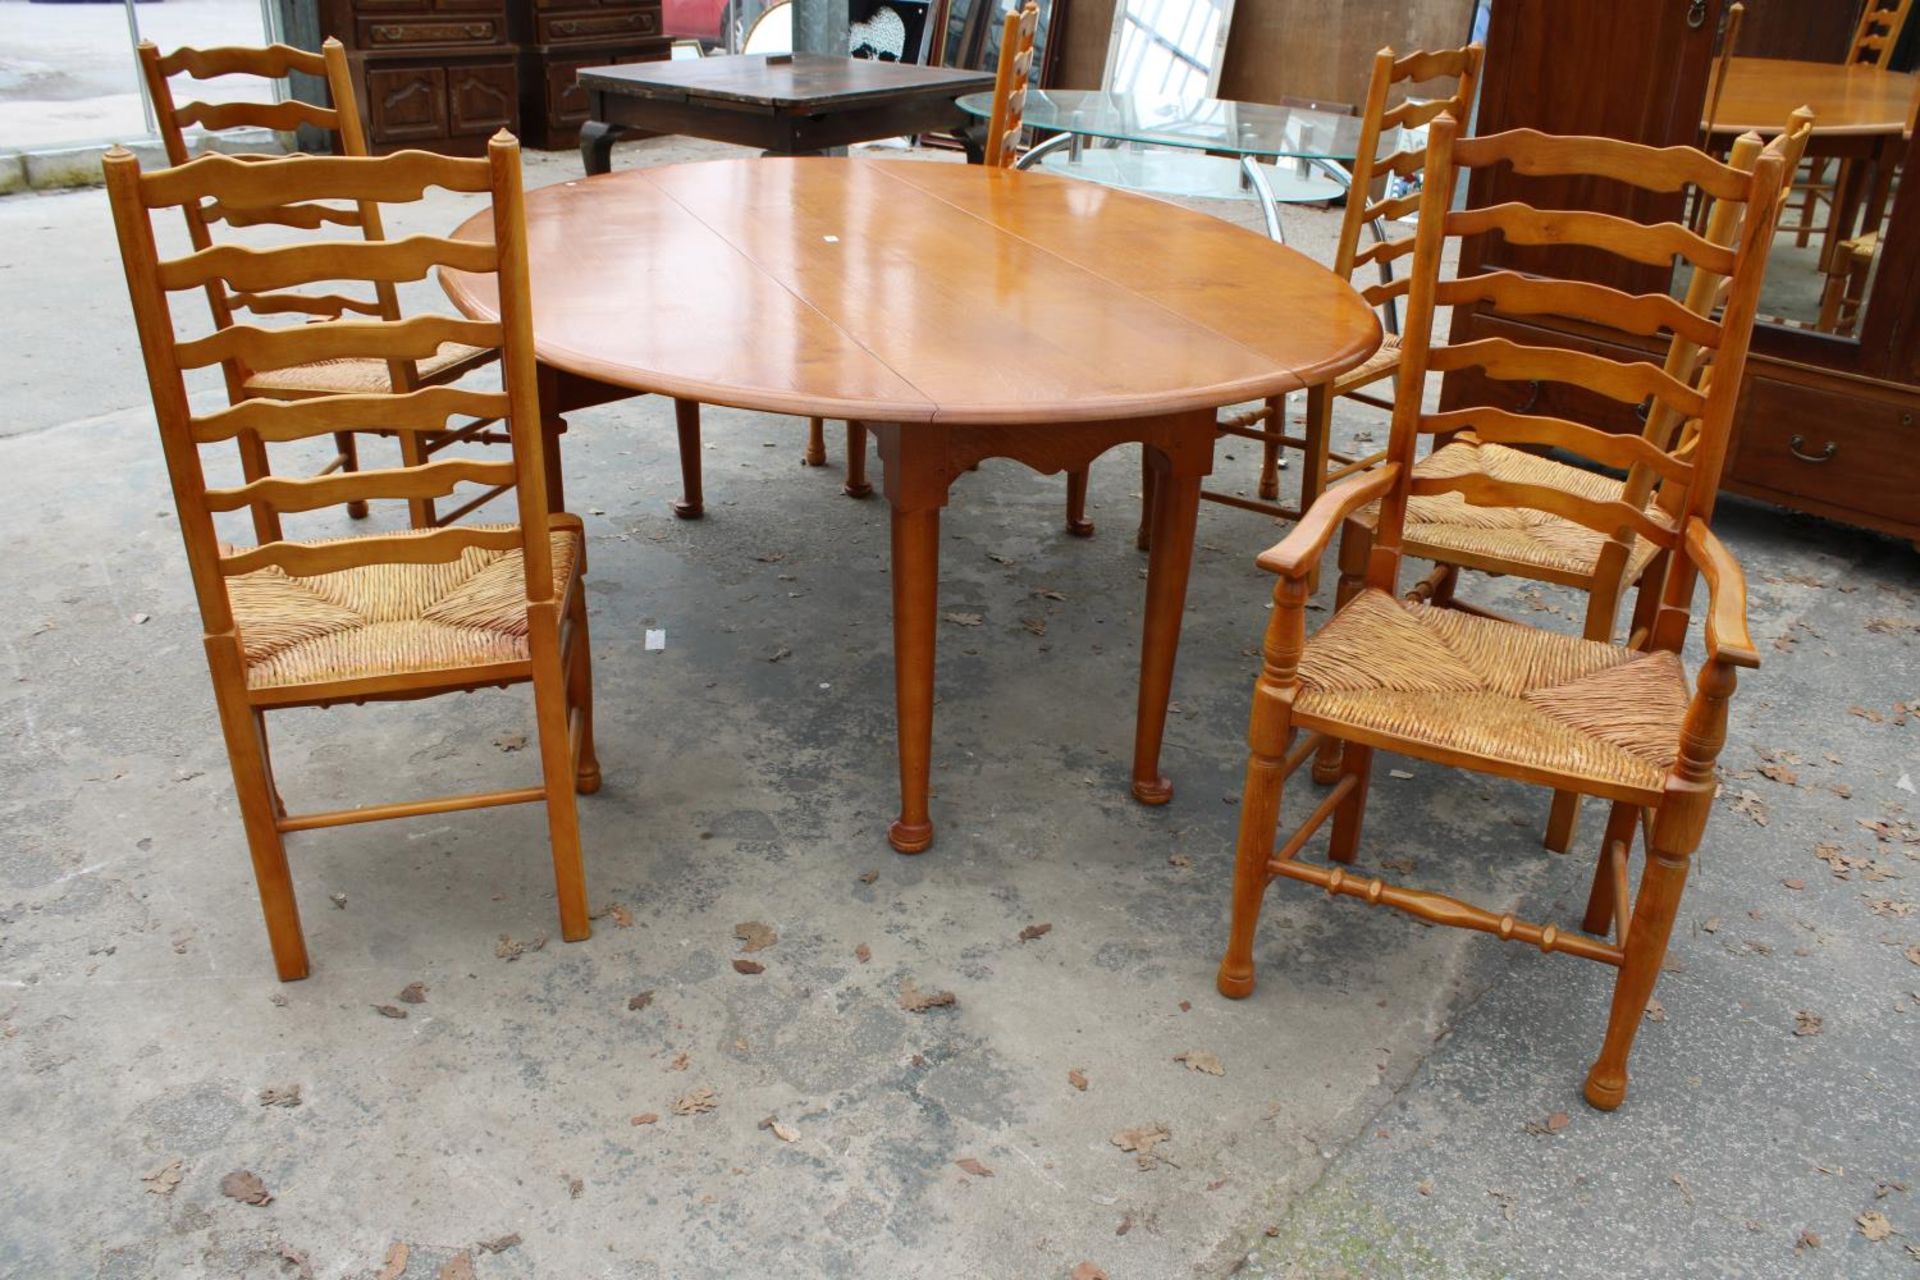 A GEORGIAN STYLE OVAL OAK WAKES TABLE, 77" X 59" OPENED AND SIX LADDER BACK DINING CHAIRS WITH - Image 9 of 9